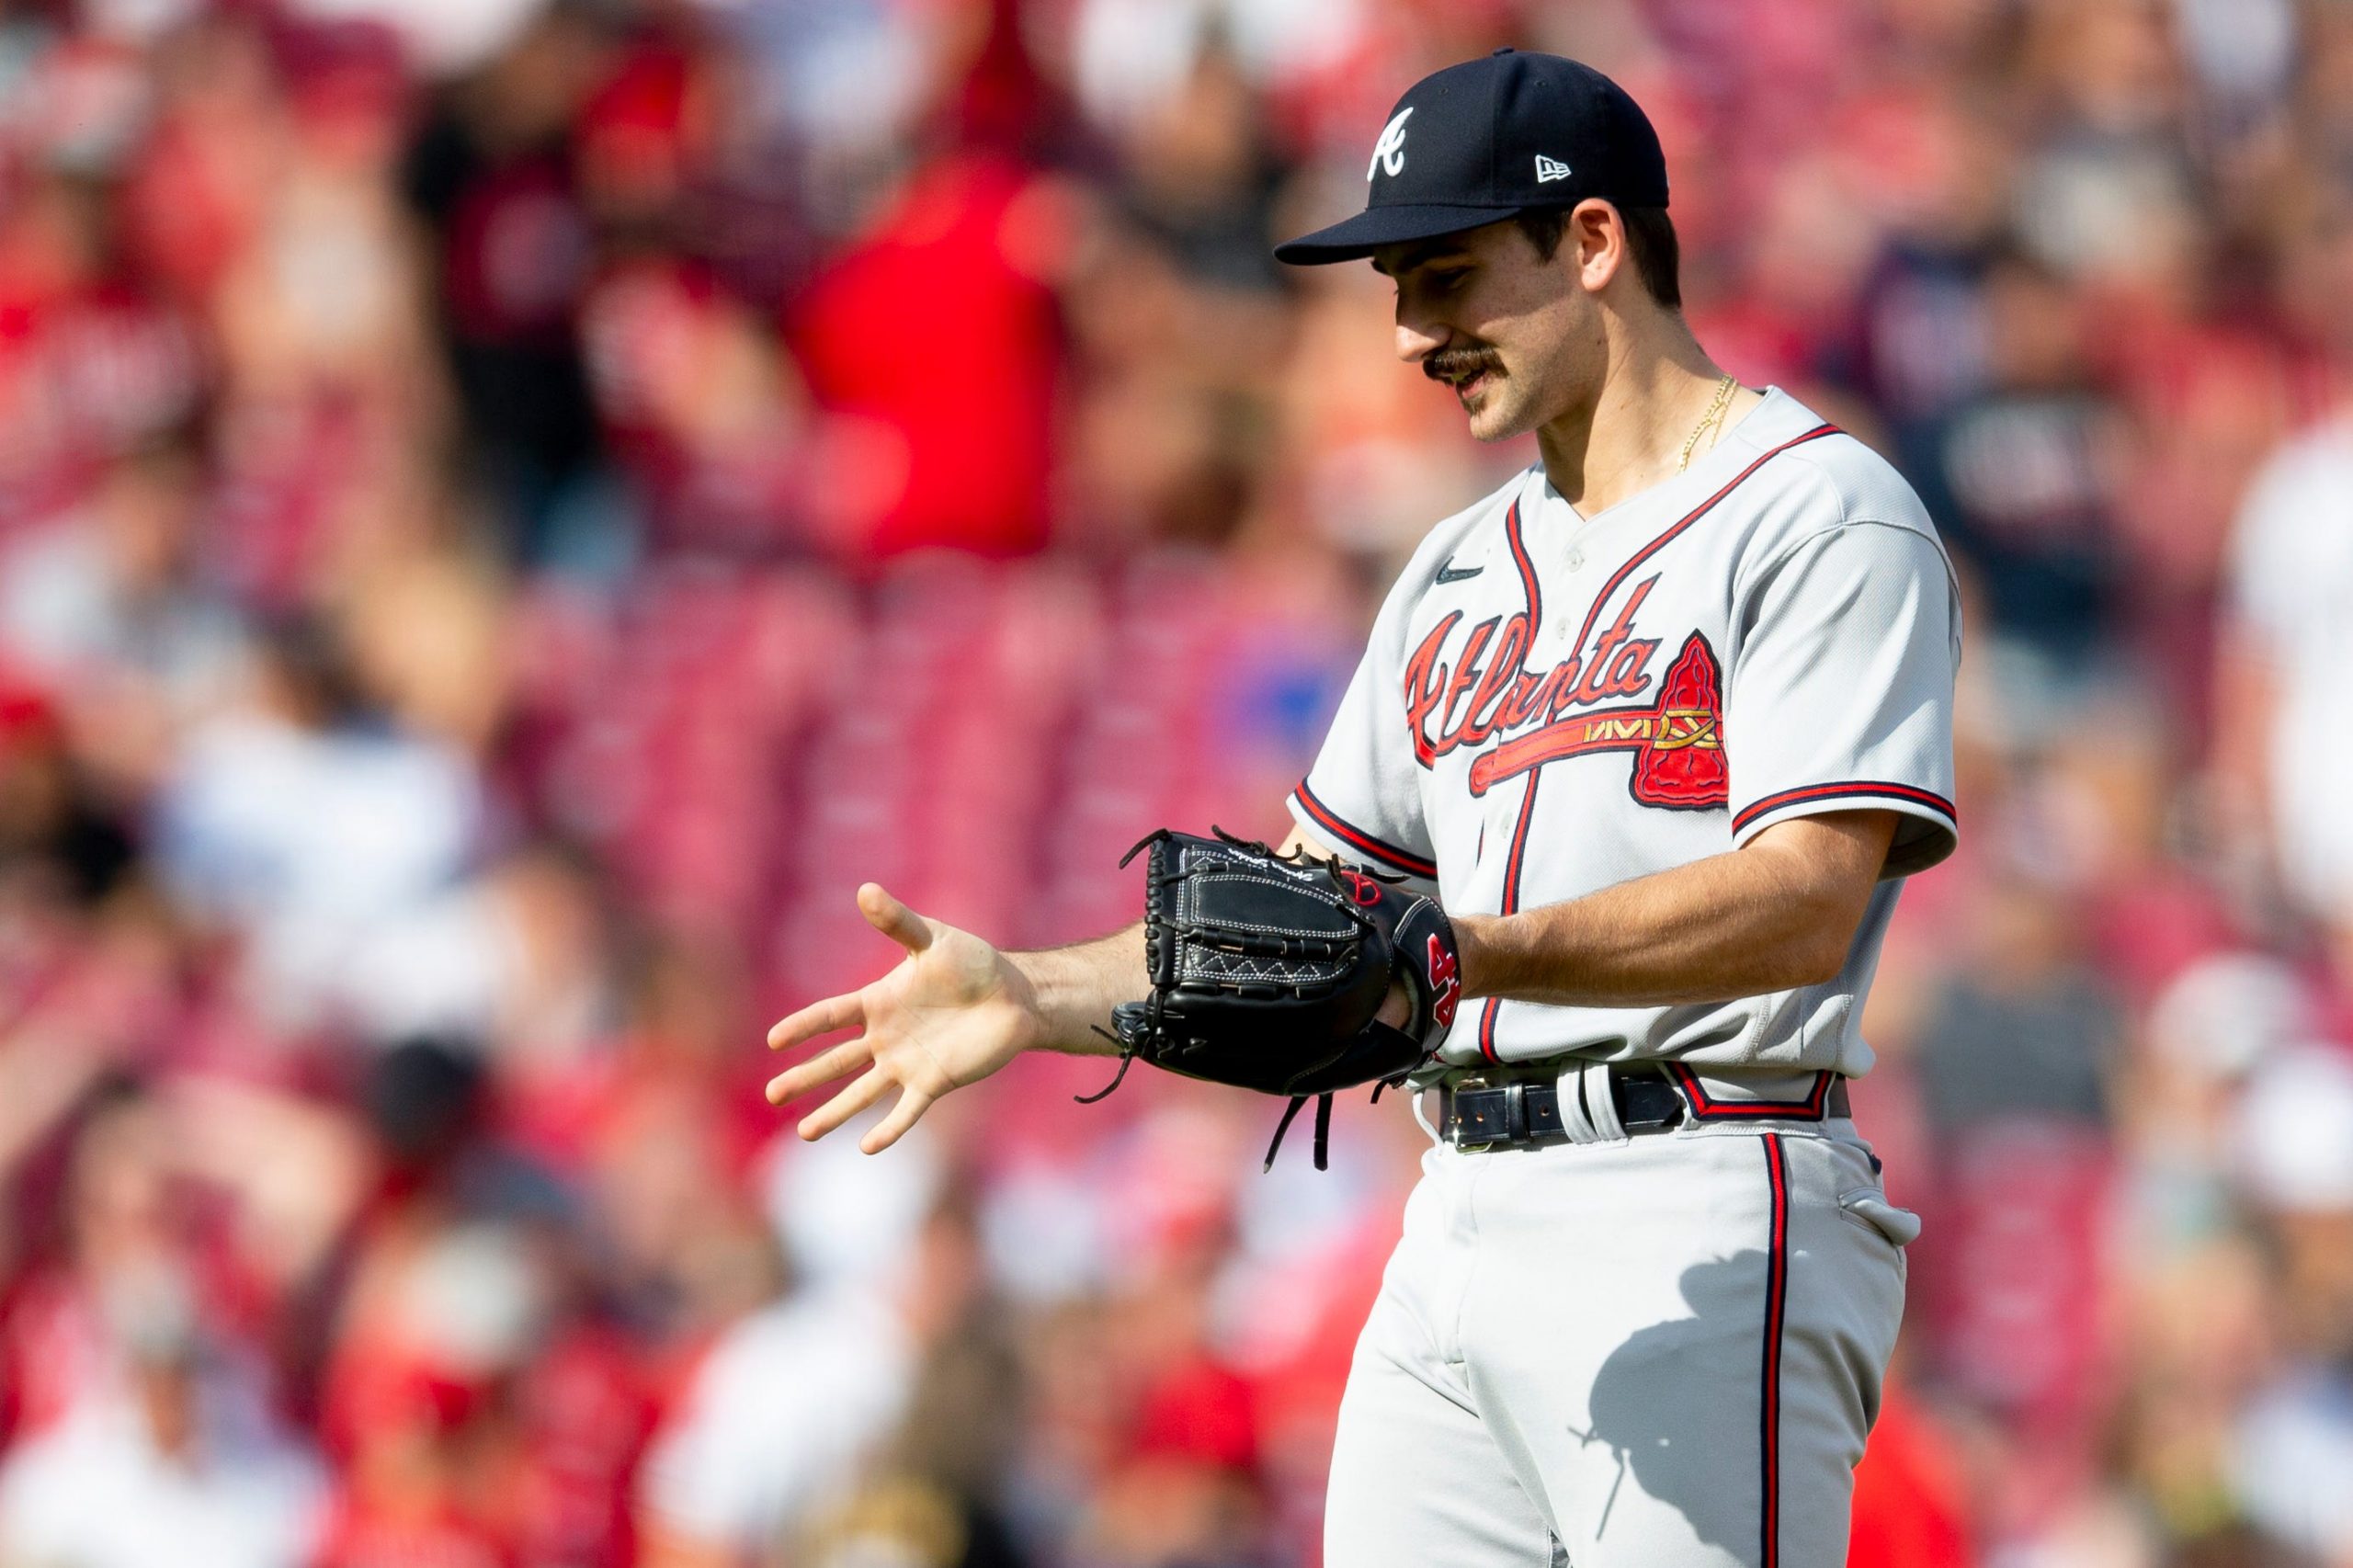 Atlanta Braves starting pitcher Spencer Strider (65) speaks to the umpire in the fifth inning of the MLB game between the Cincinnati Reds and the Atlanta Braves at Great American Ball Park in Cincinnati on Saturday, July 2, 2022